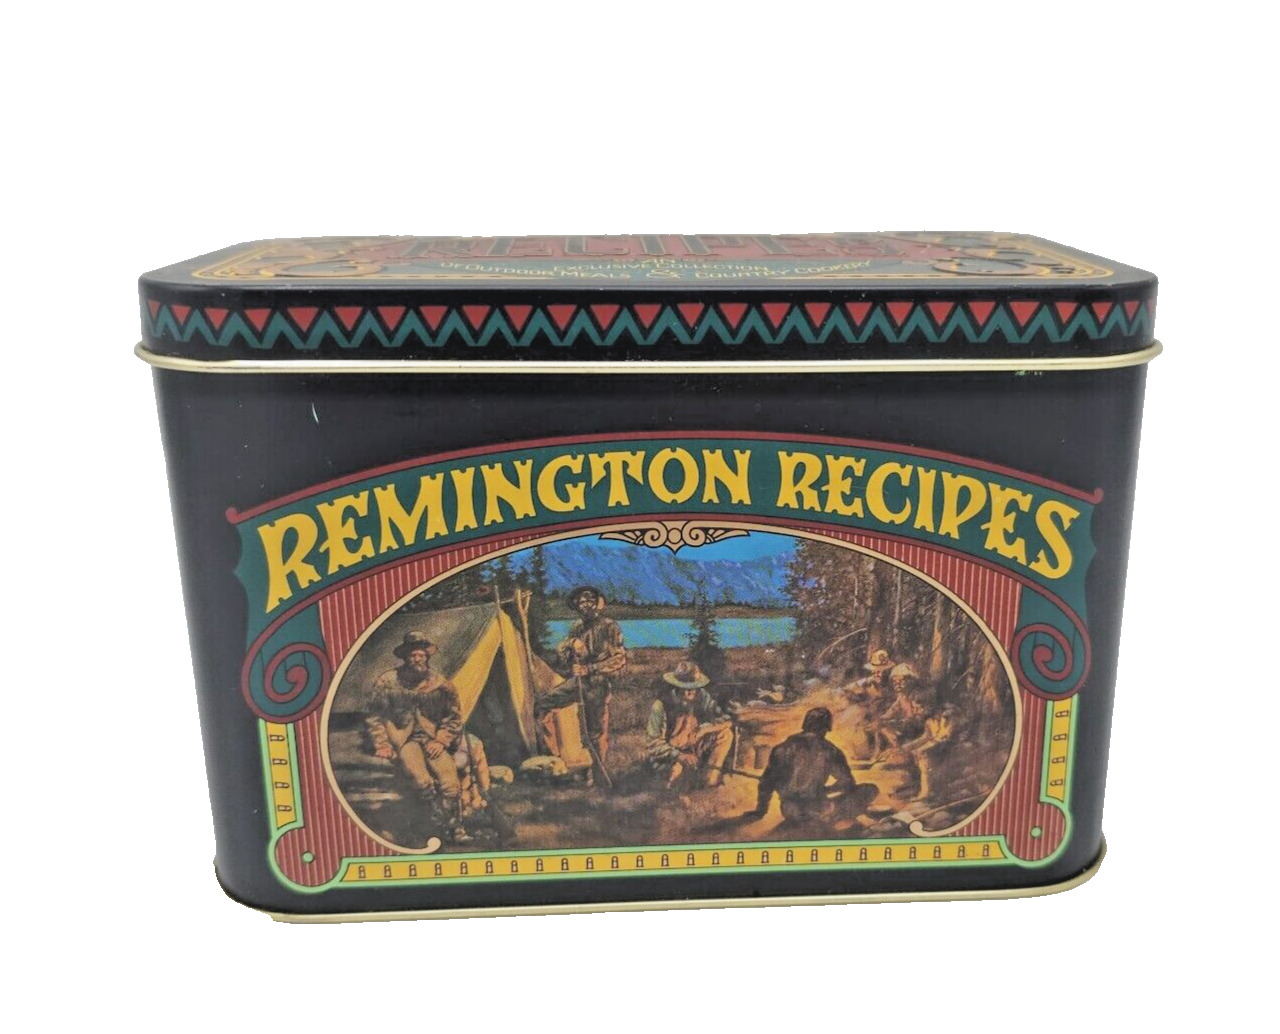 Vintage Remington Recipes Survivalist Outdoor Meals & Country Cooking Tin Box